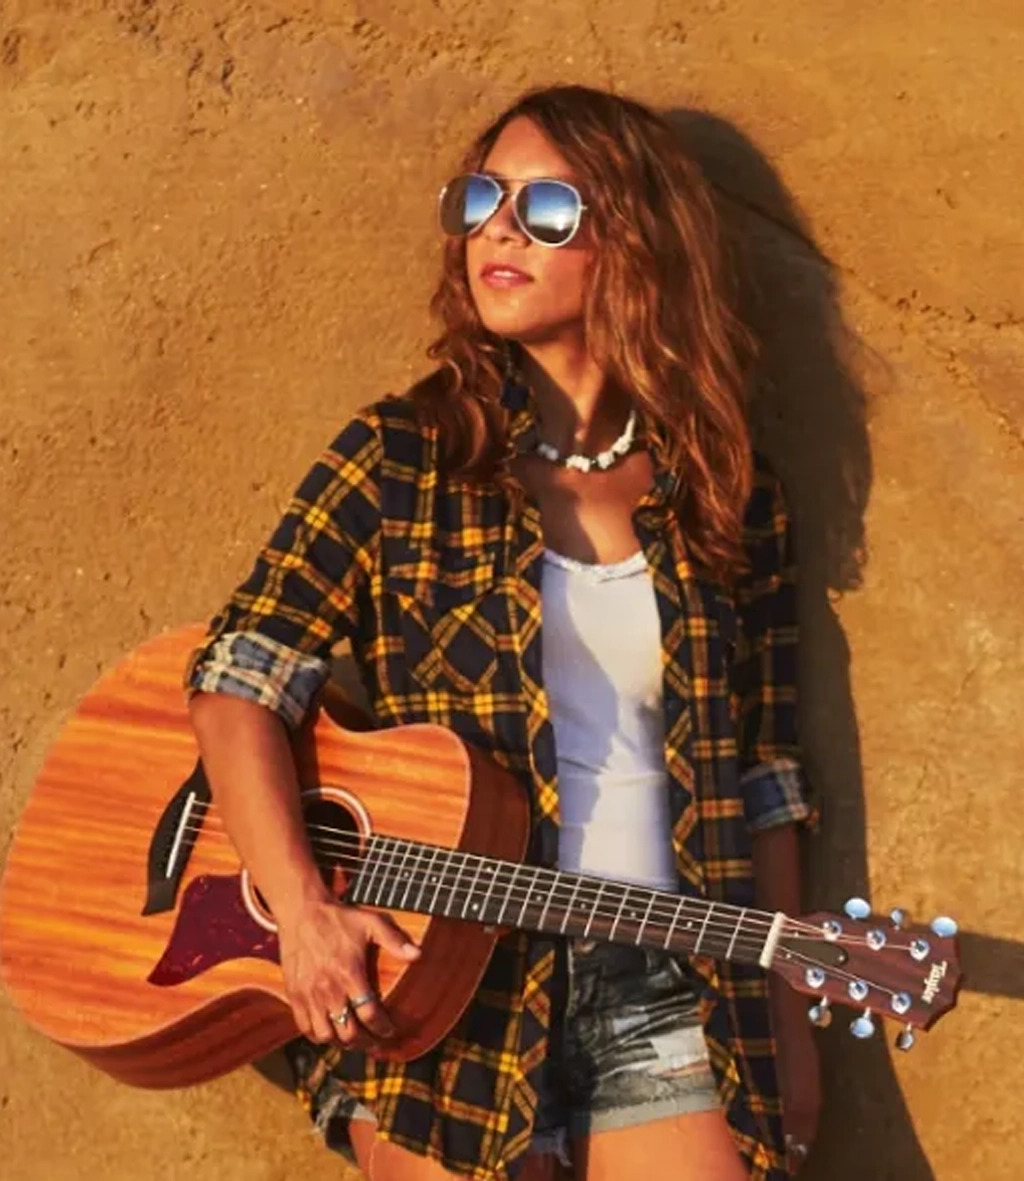 Girl leaning on wall wearing sunglasses plays the gs mini guitar